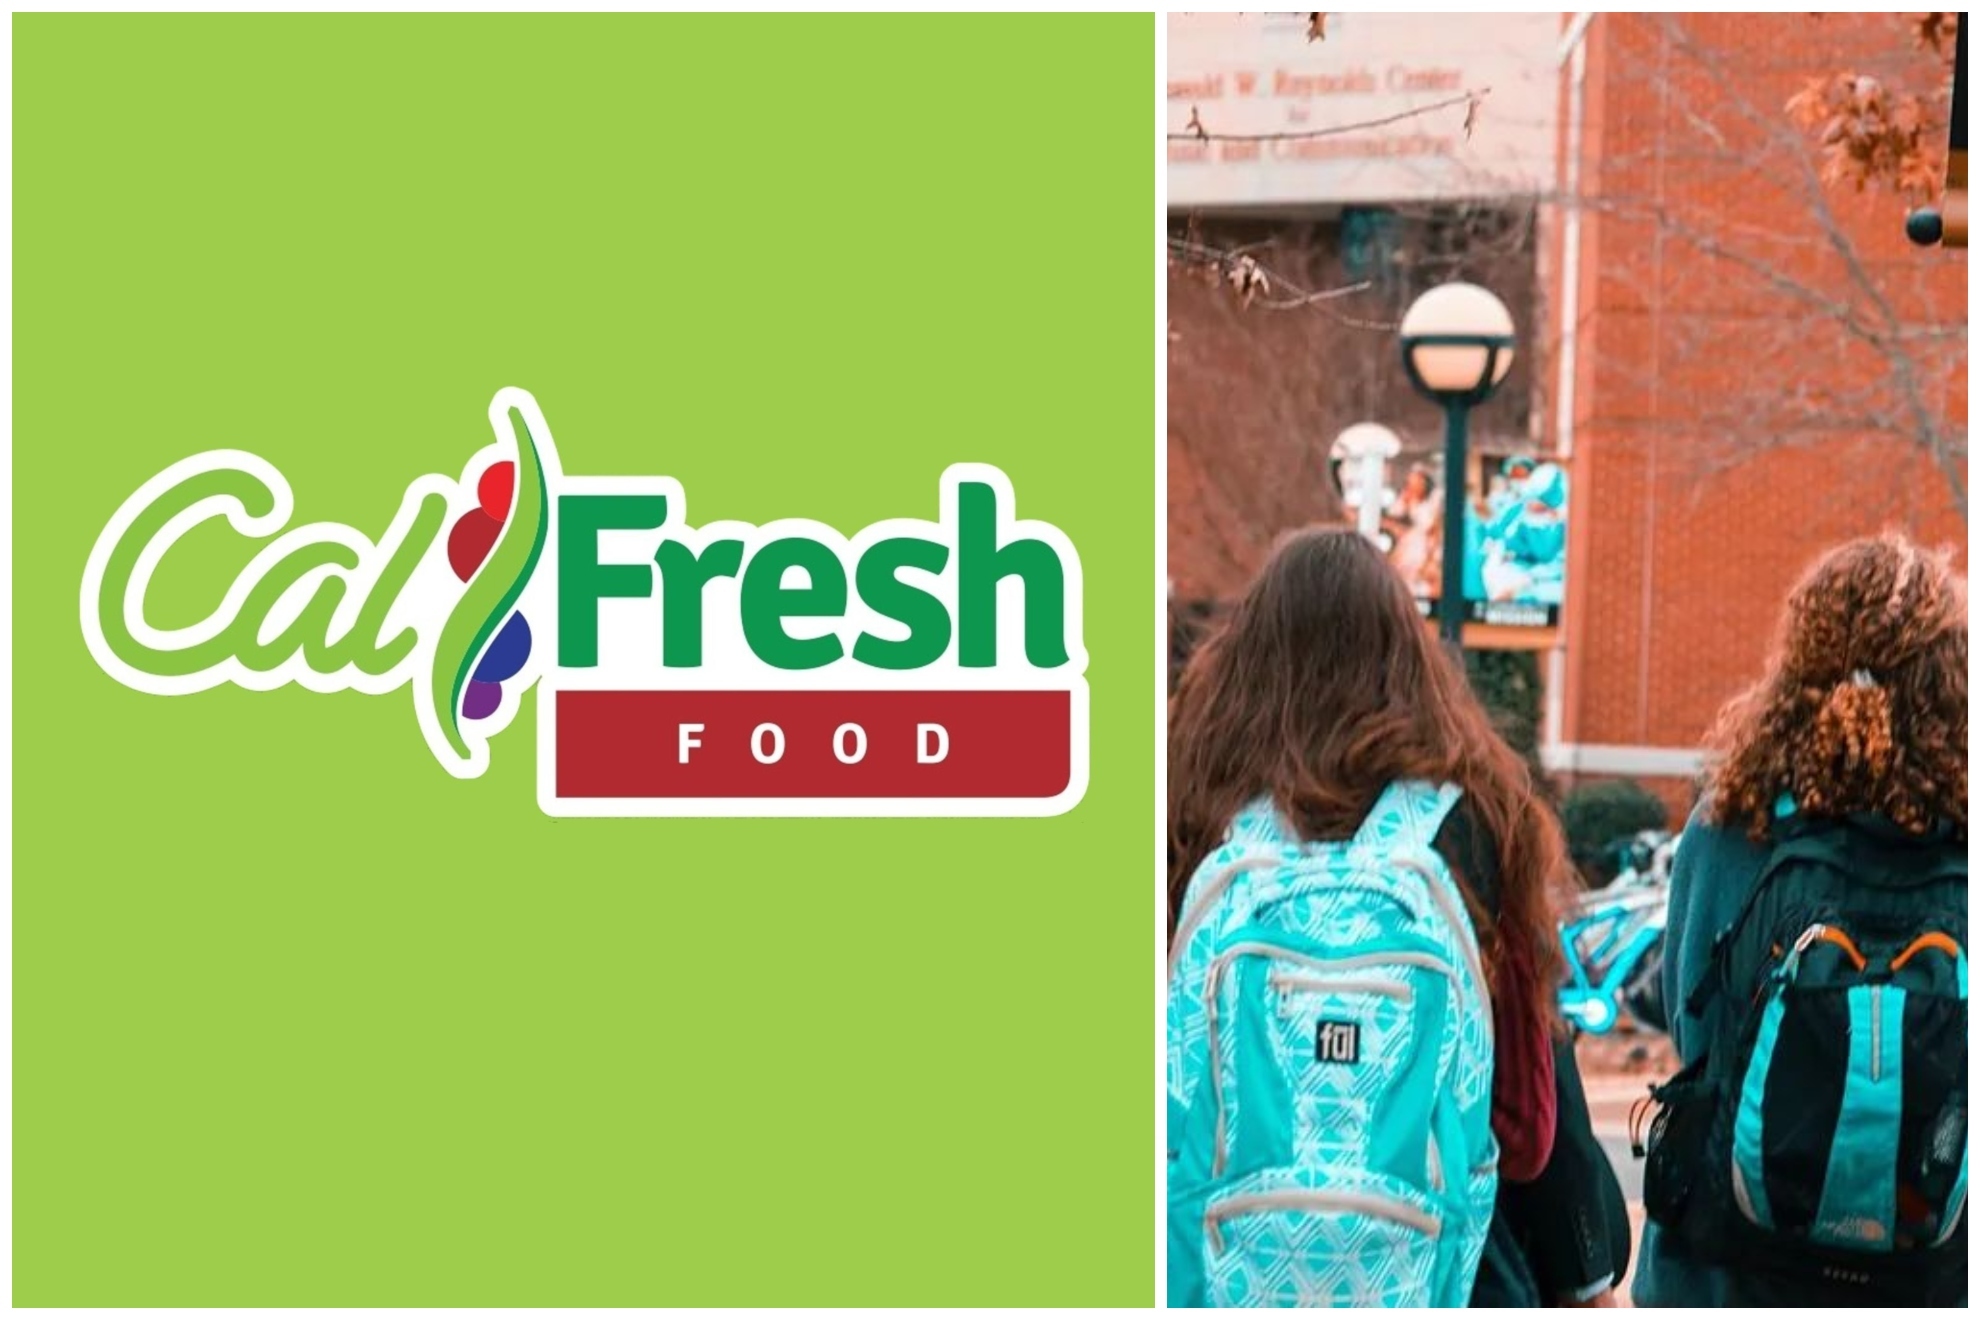 CalFresh for students: How much can you get in California in food stamps if youre a student?